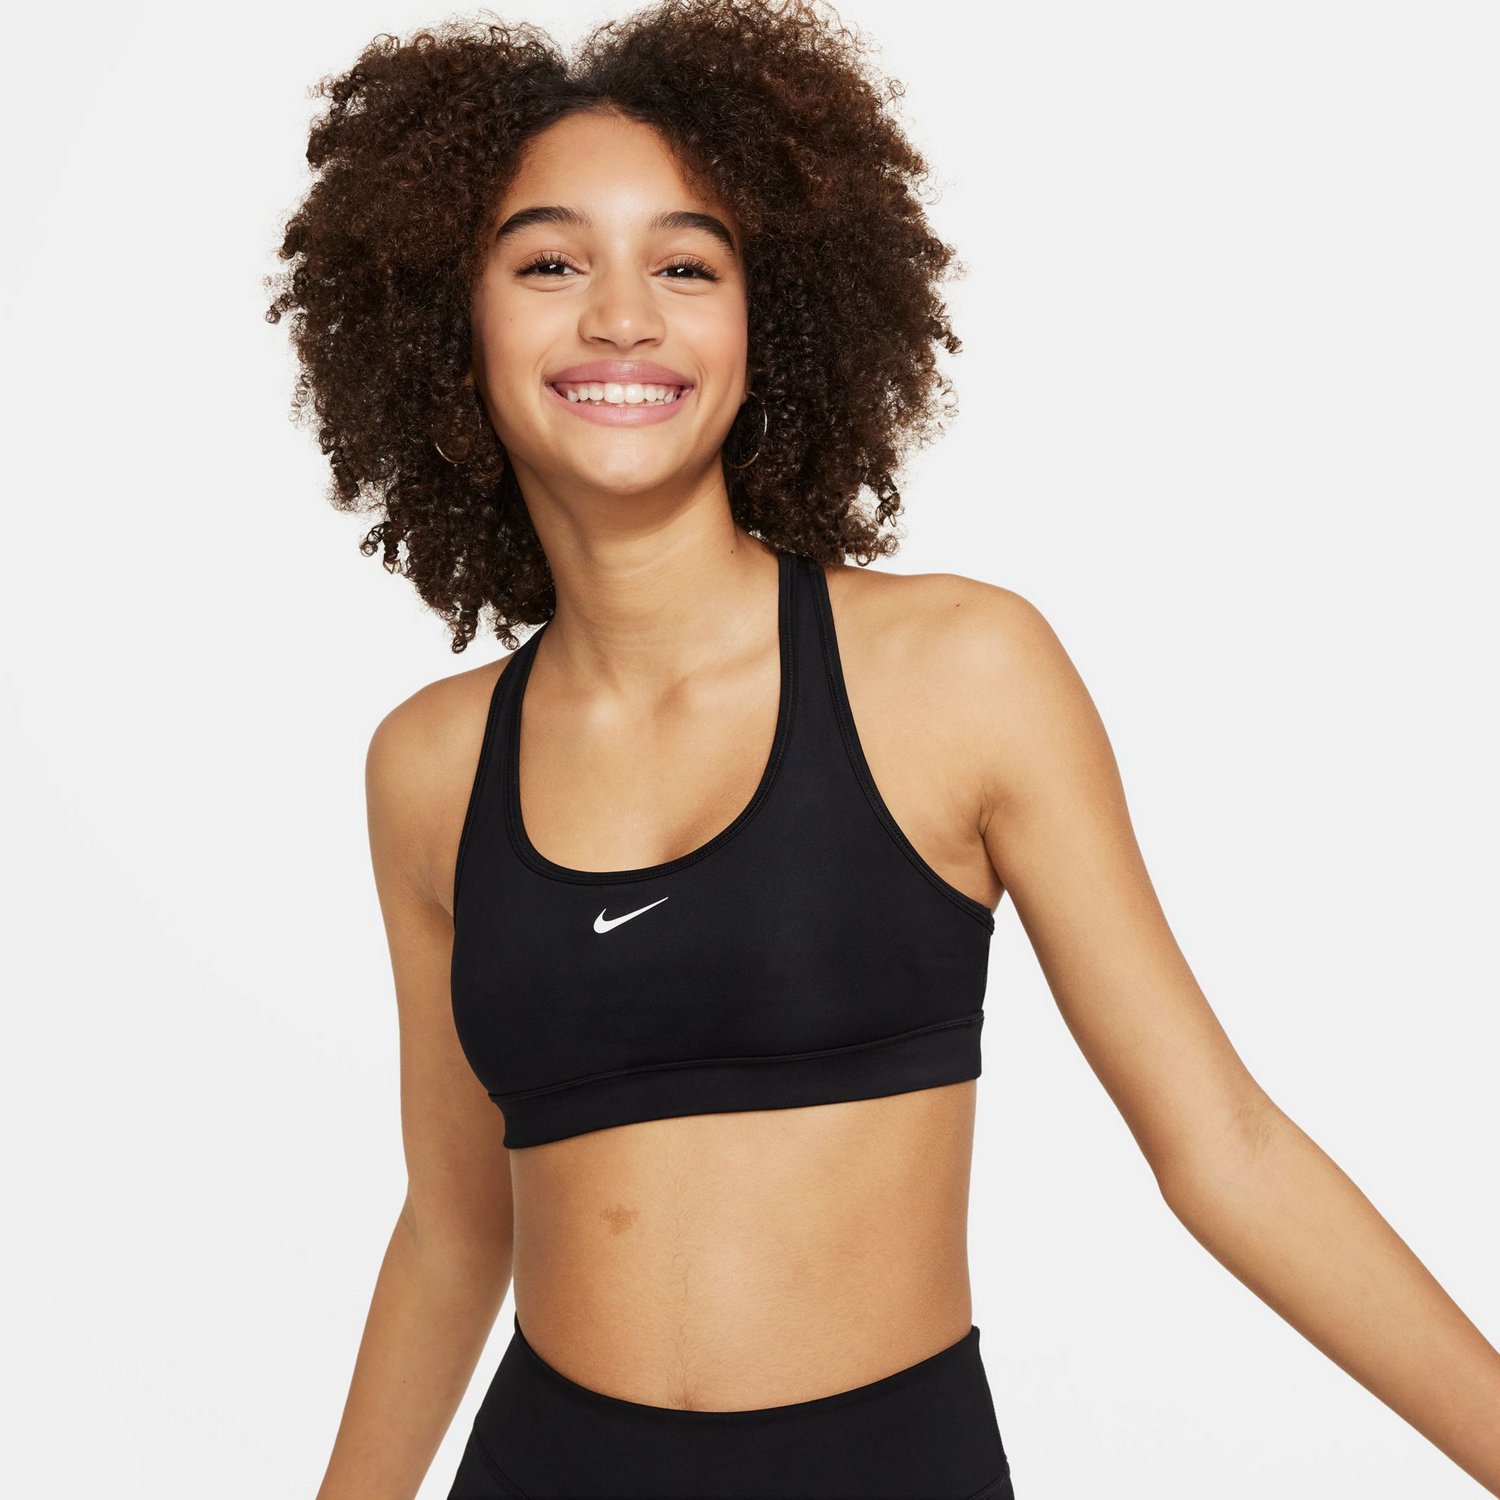 Nike Older Kids' (girls') Sports Bra - White from Nike on 21 Buttons